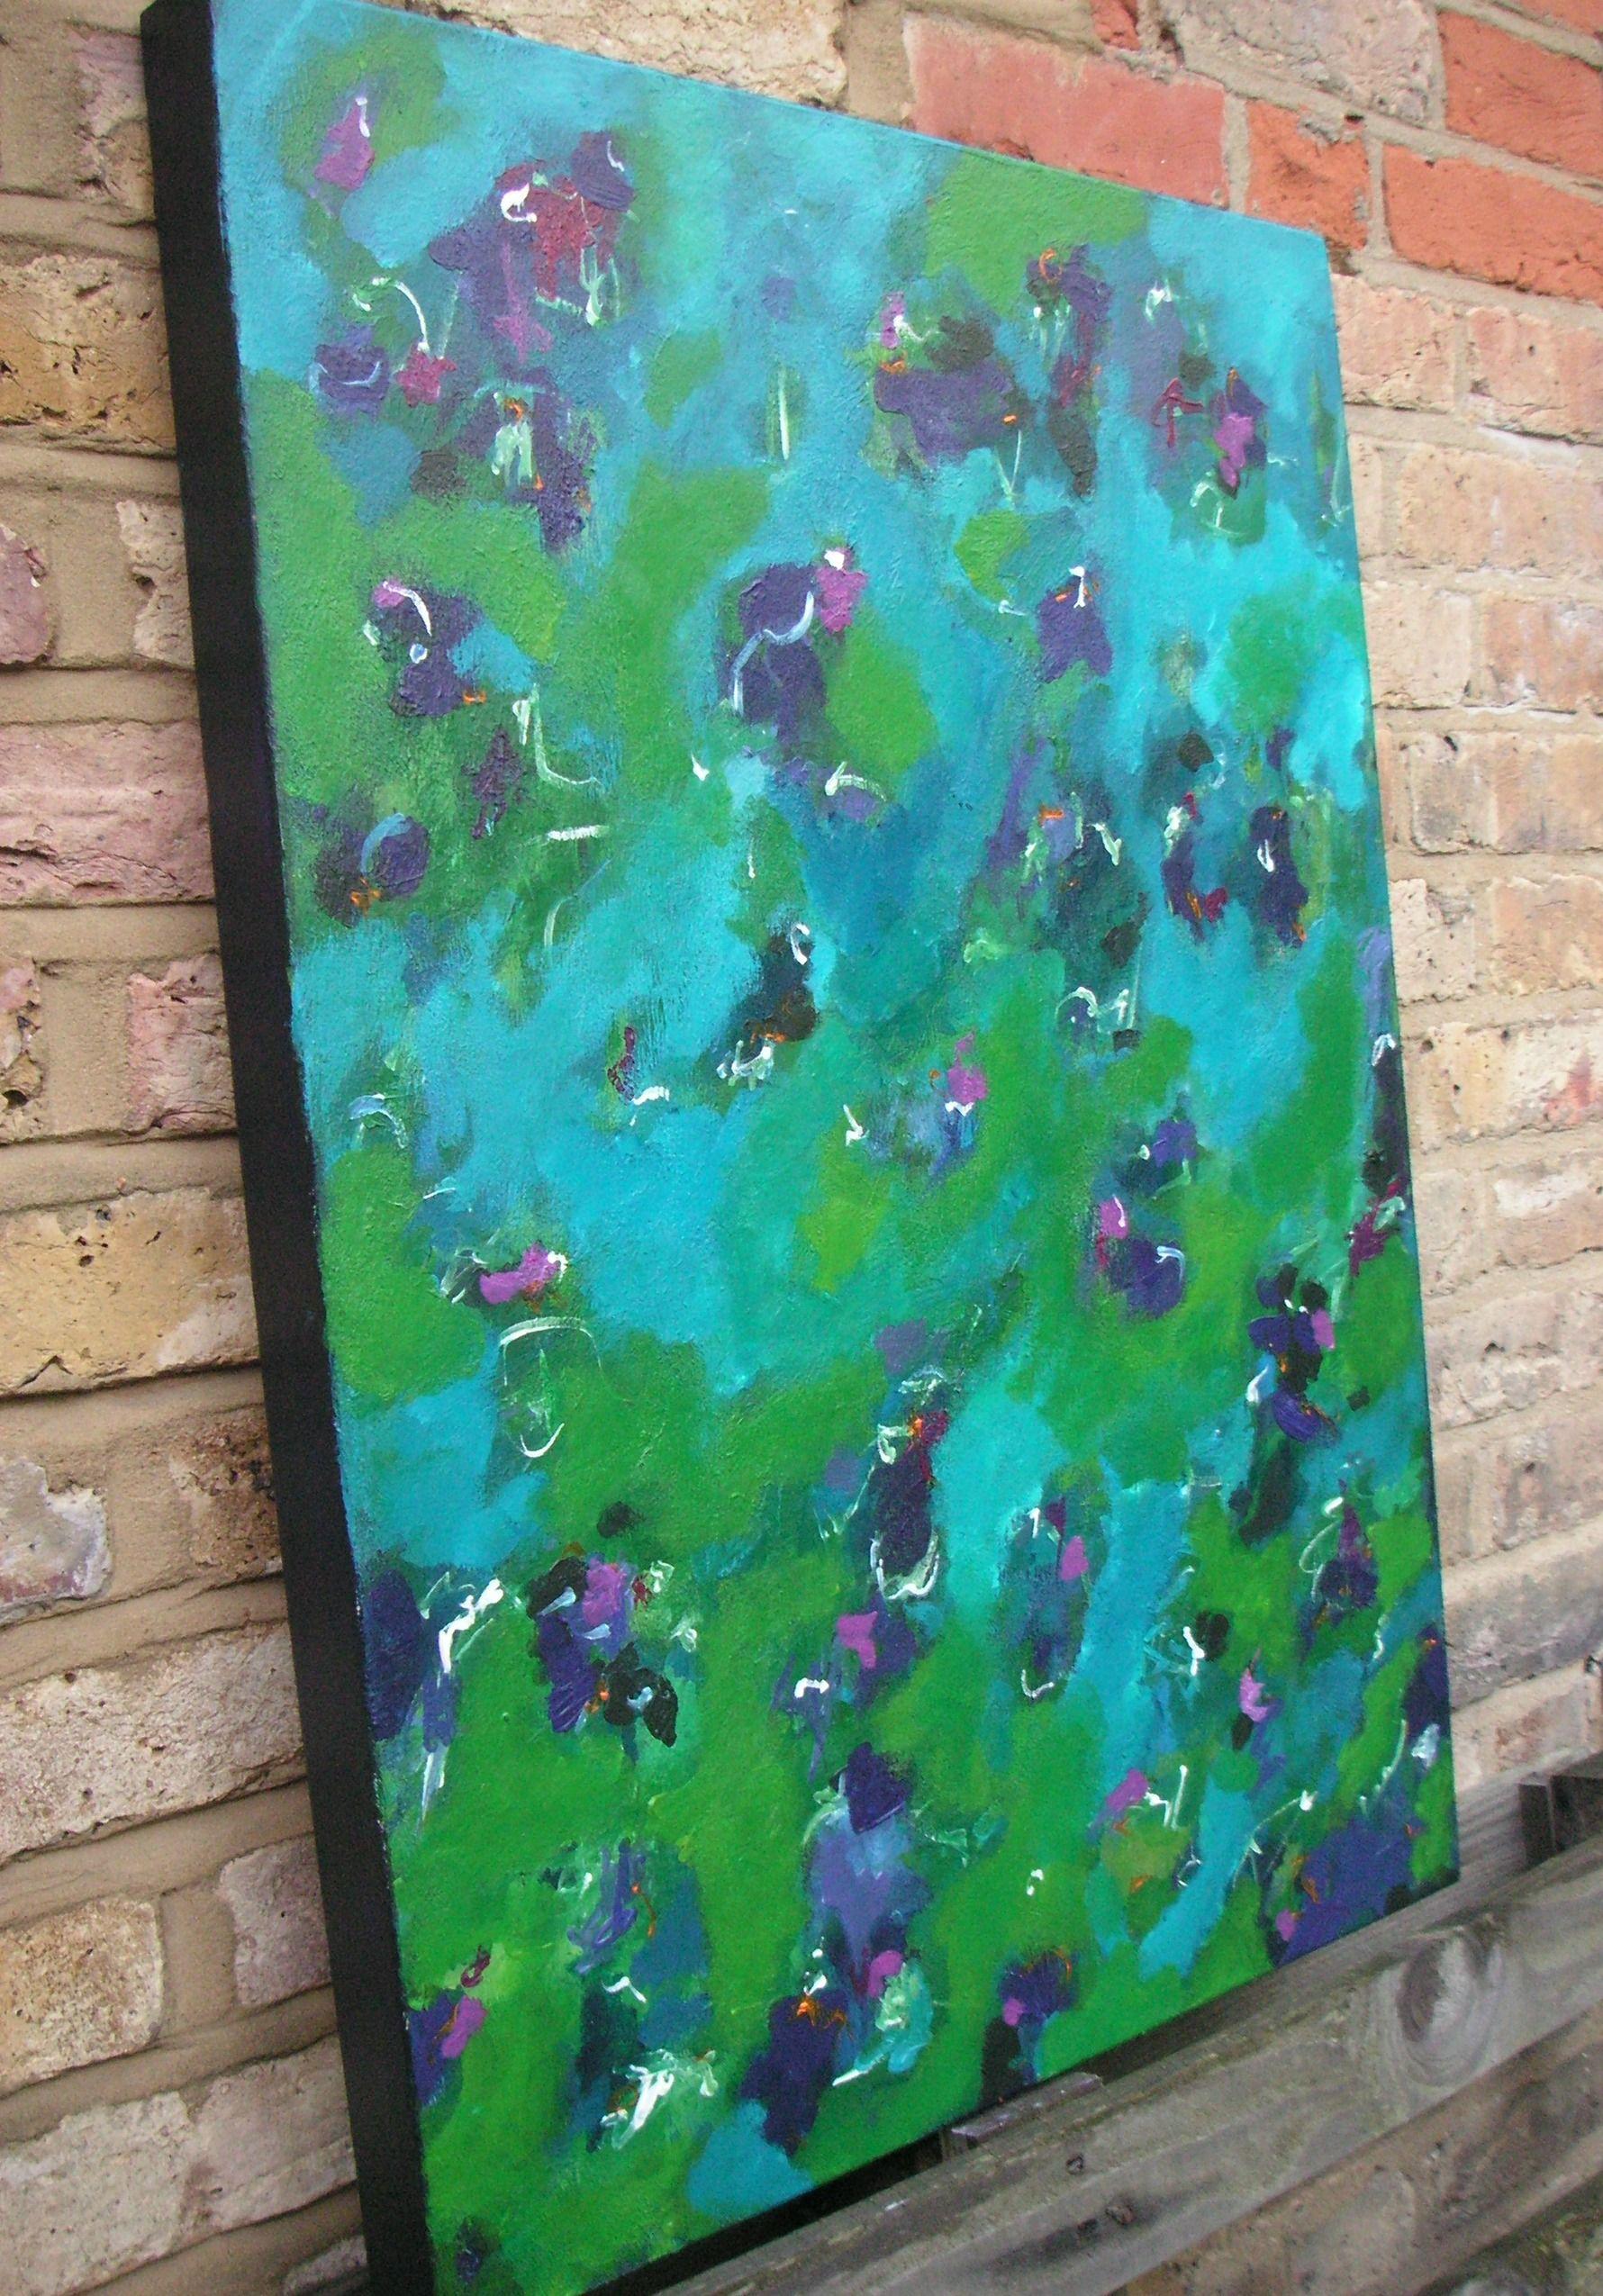 A vibrant abstract painting which I have worked on for quite some time building the painting carefully layer by layer. Strong blues, purples, greens, orange and magenta combine to a colourful, abstract painting inspired by a reflective mood.     The